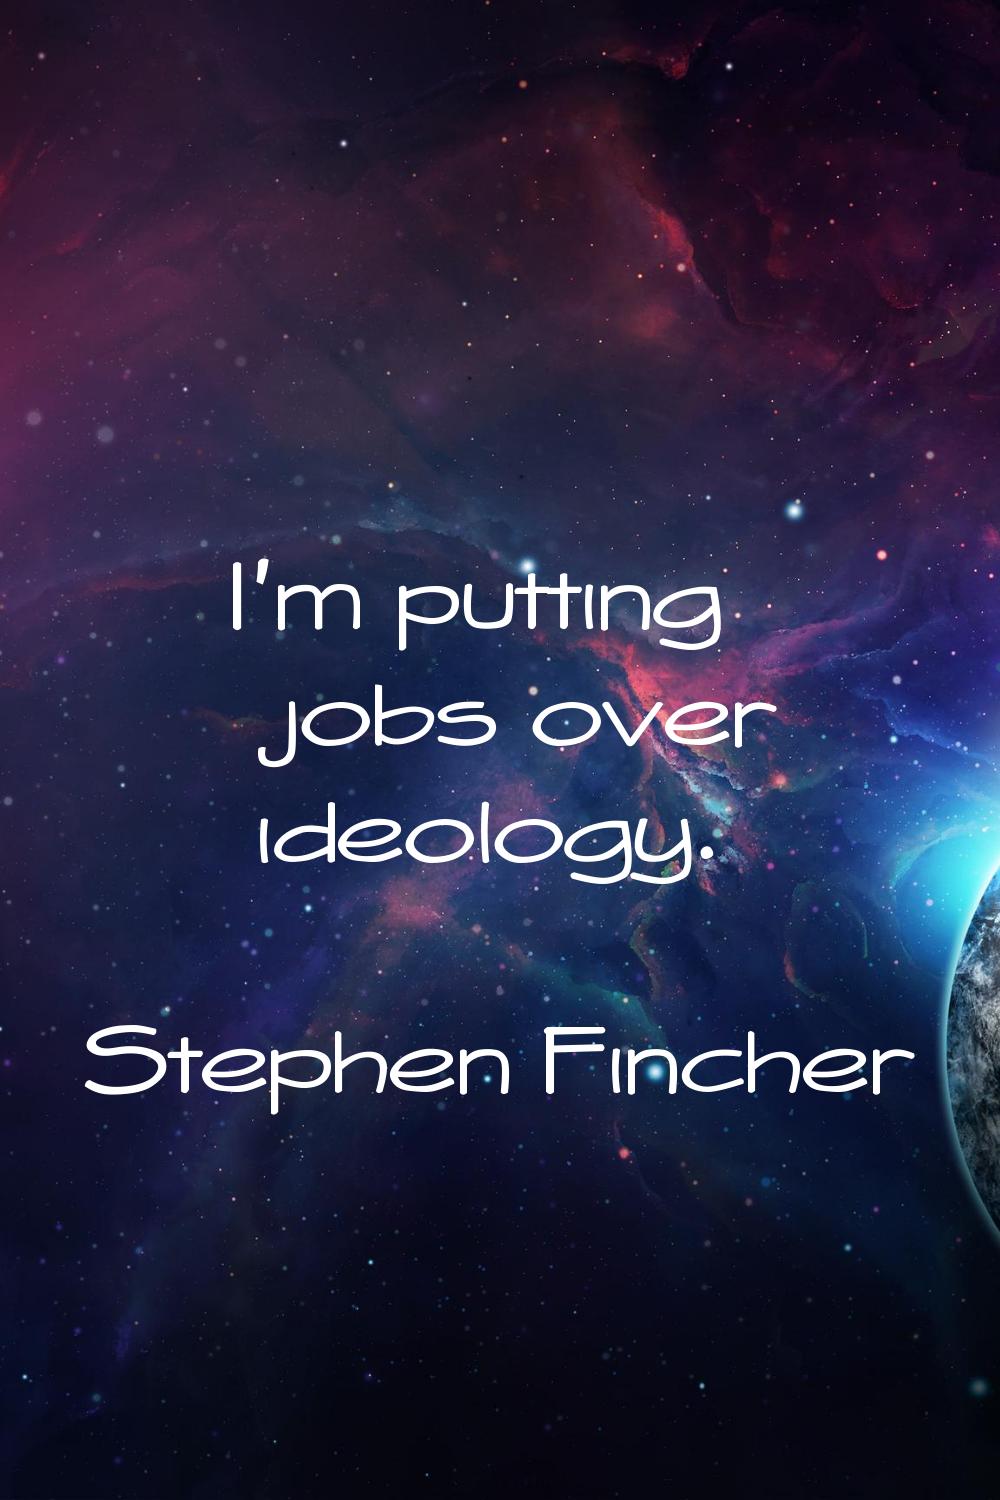 I'm putting jobs over ideology.